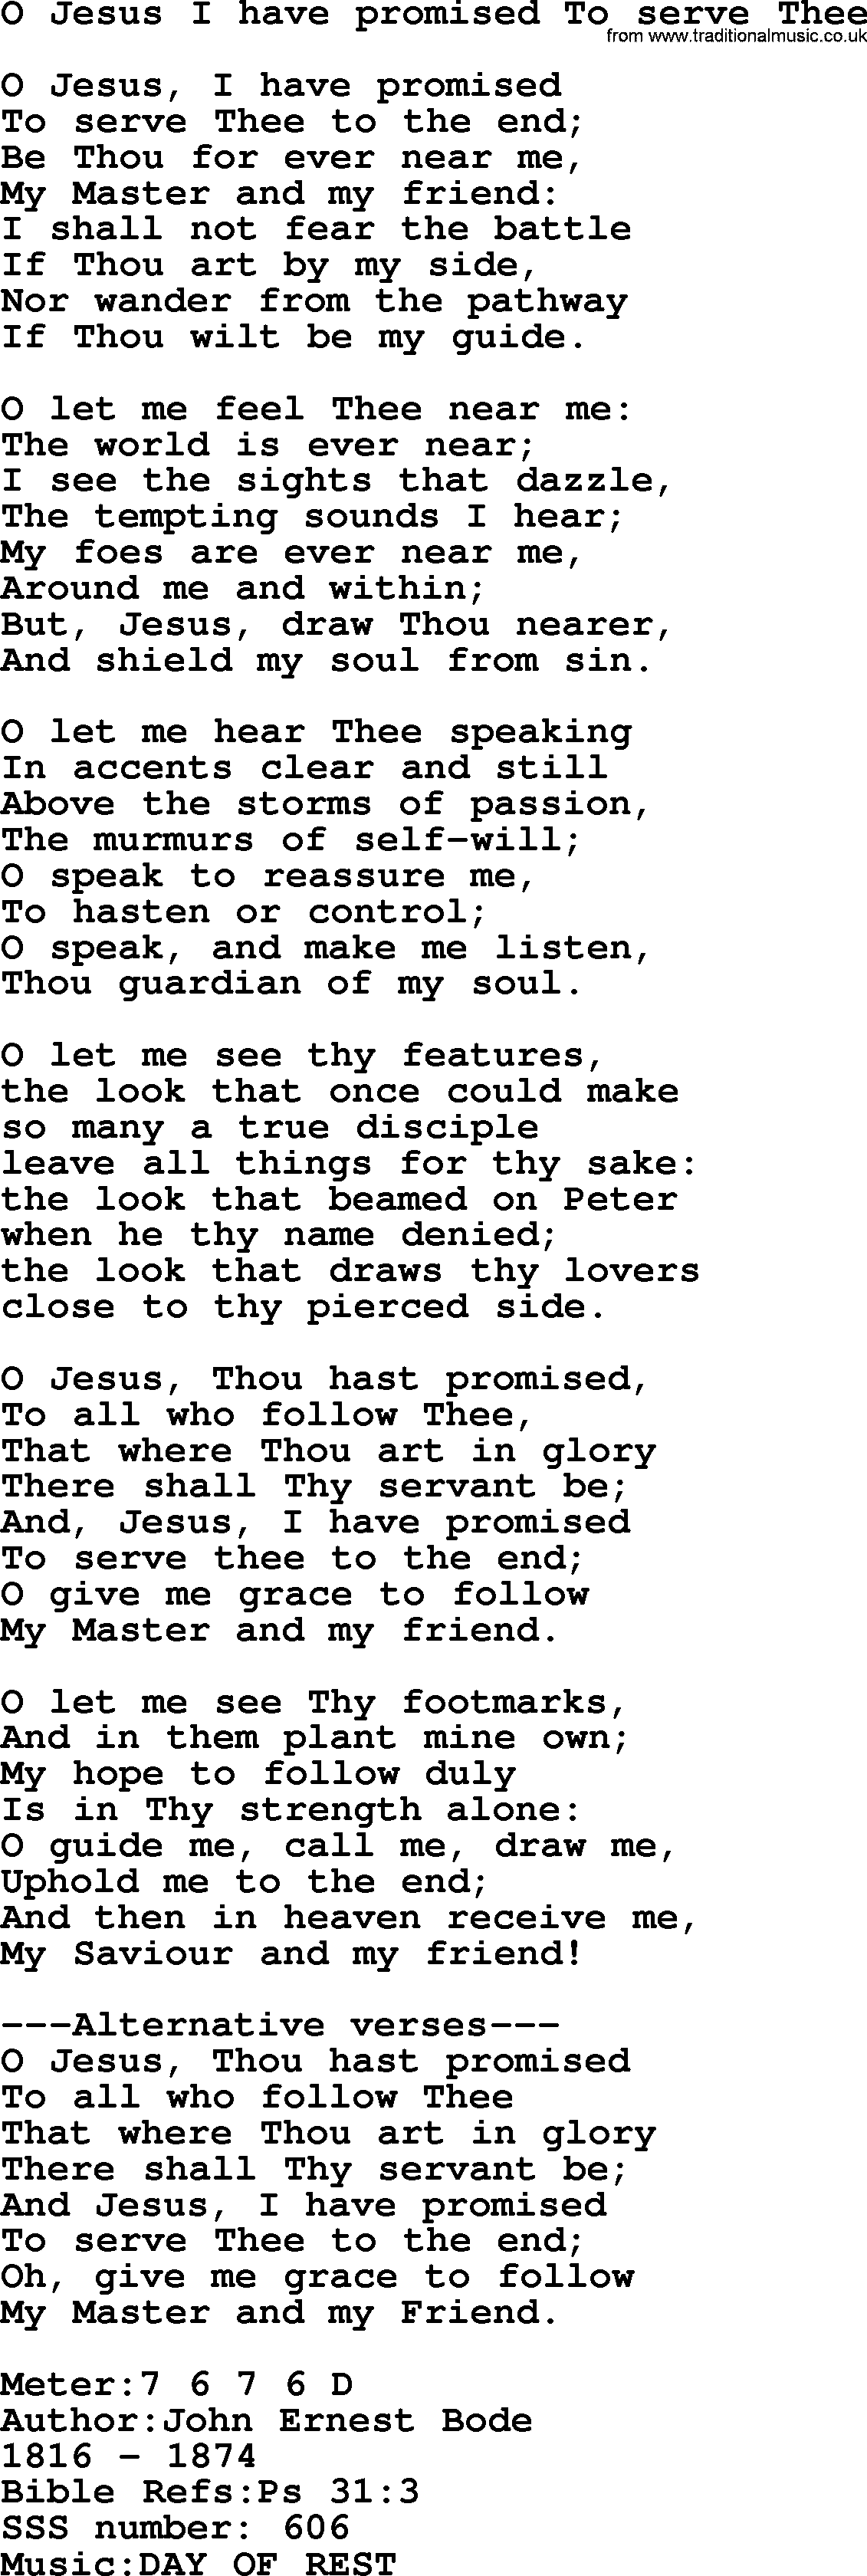 Sacred Songs and Solos complete, 1200 Hymns, title: O Jesus I Have Promised To Serve Thee, lyrics and PDF